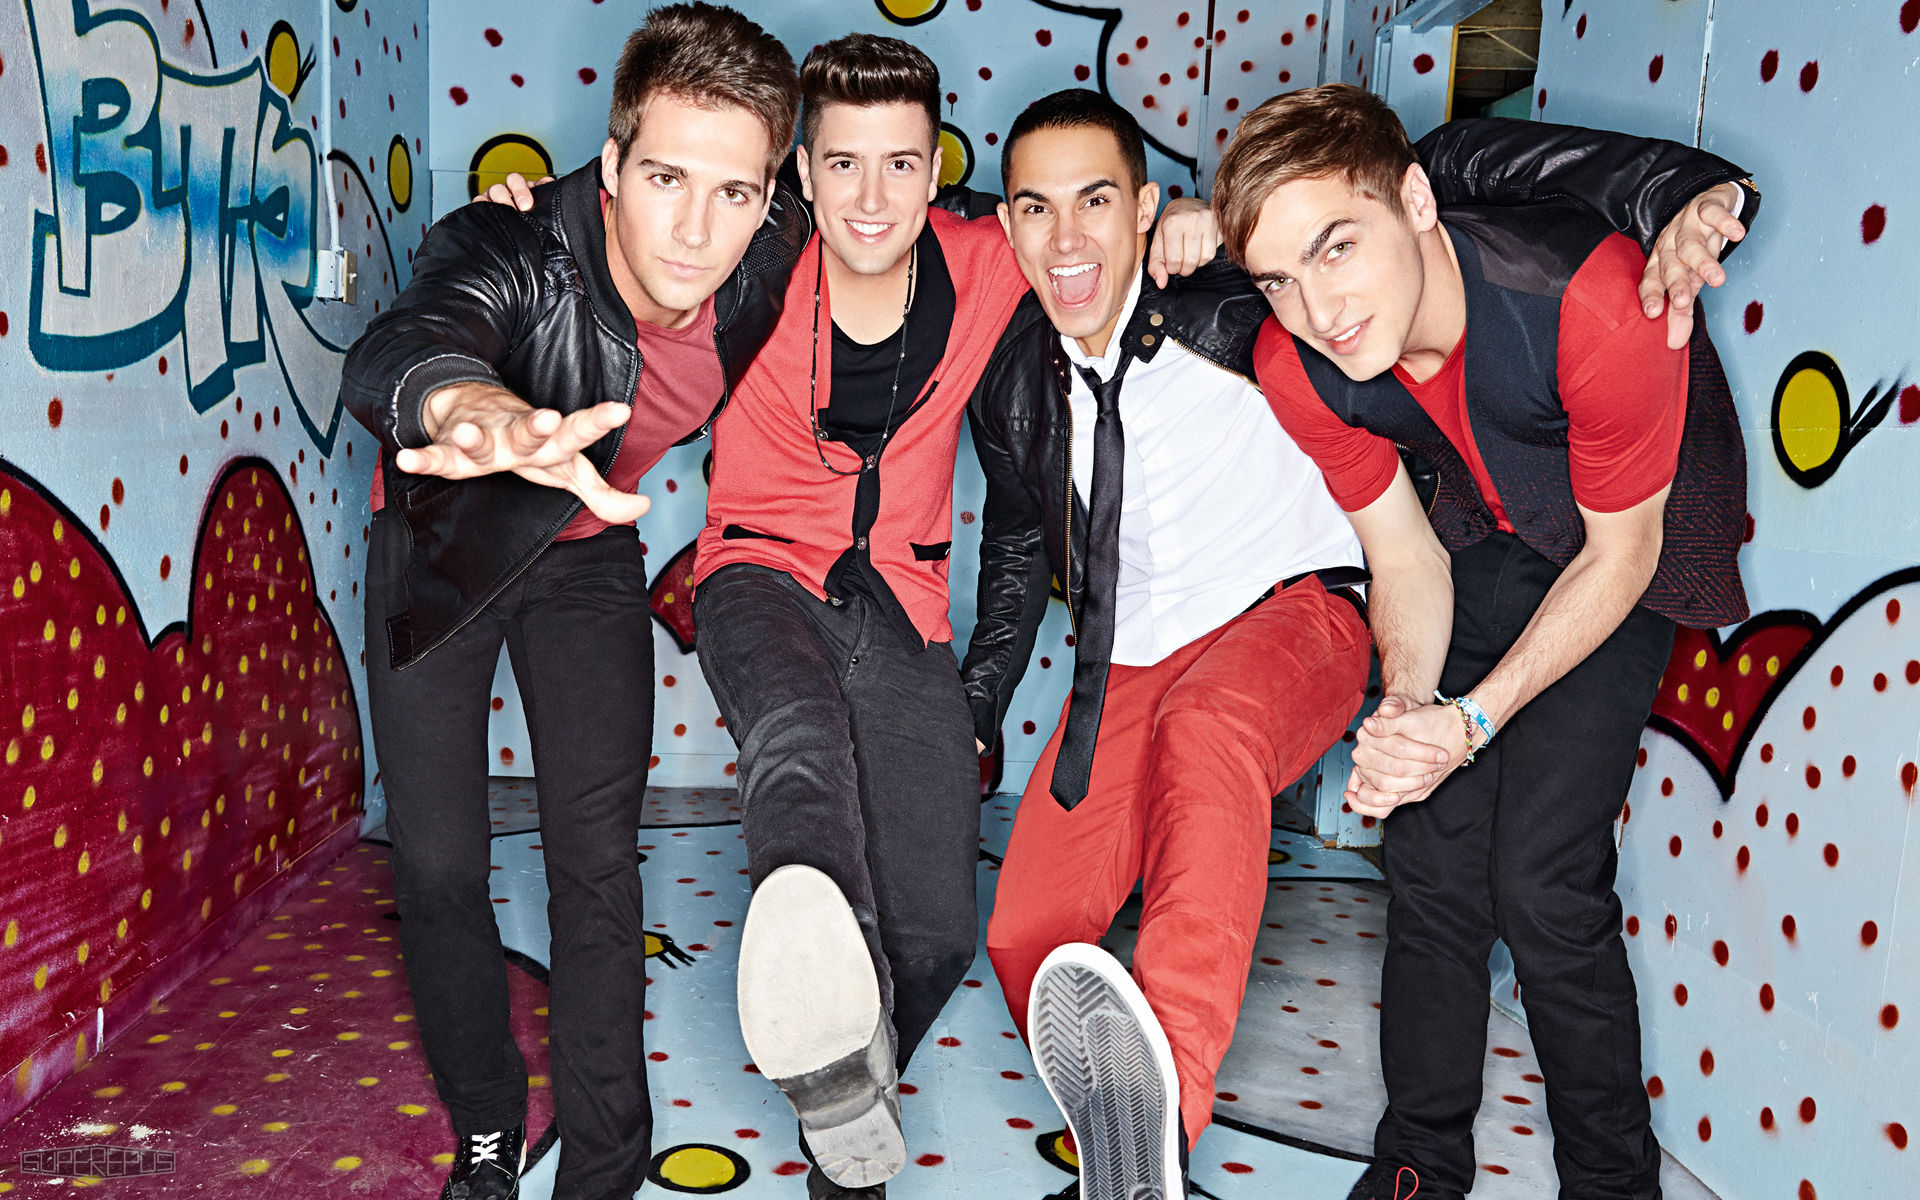 Download Rushers Images Big Time Rush Wallpaper And Background  Big Time  Rush 2011 PNG Image with No Background  PNGkeycom